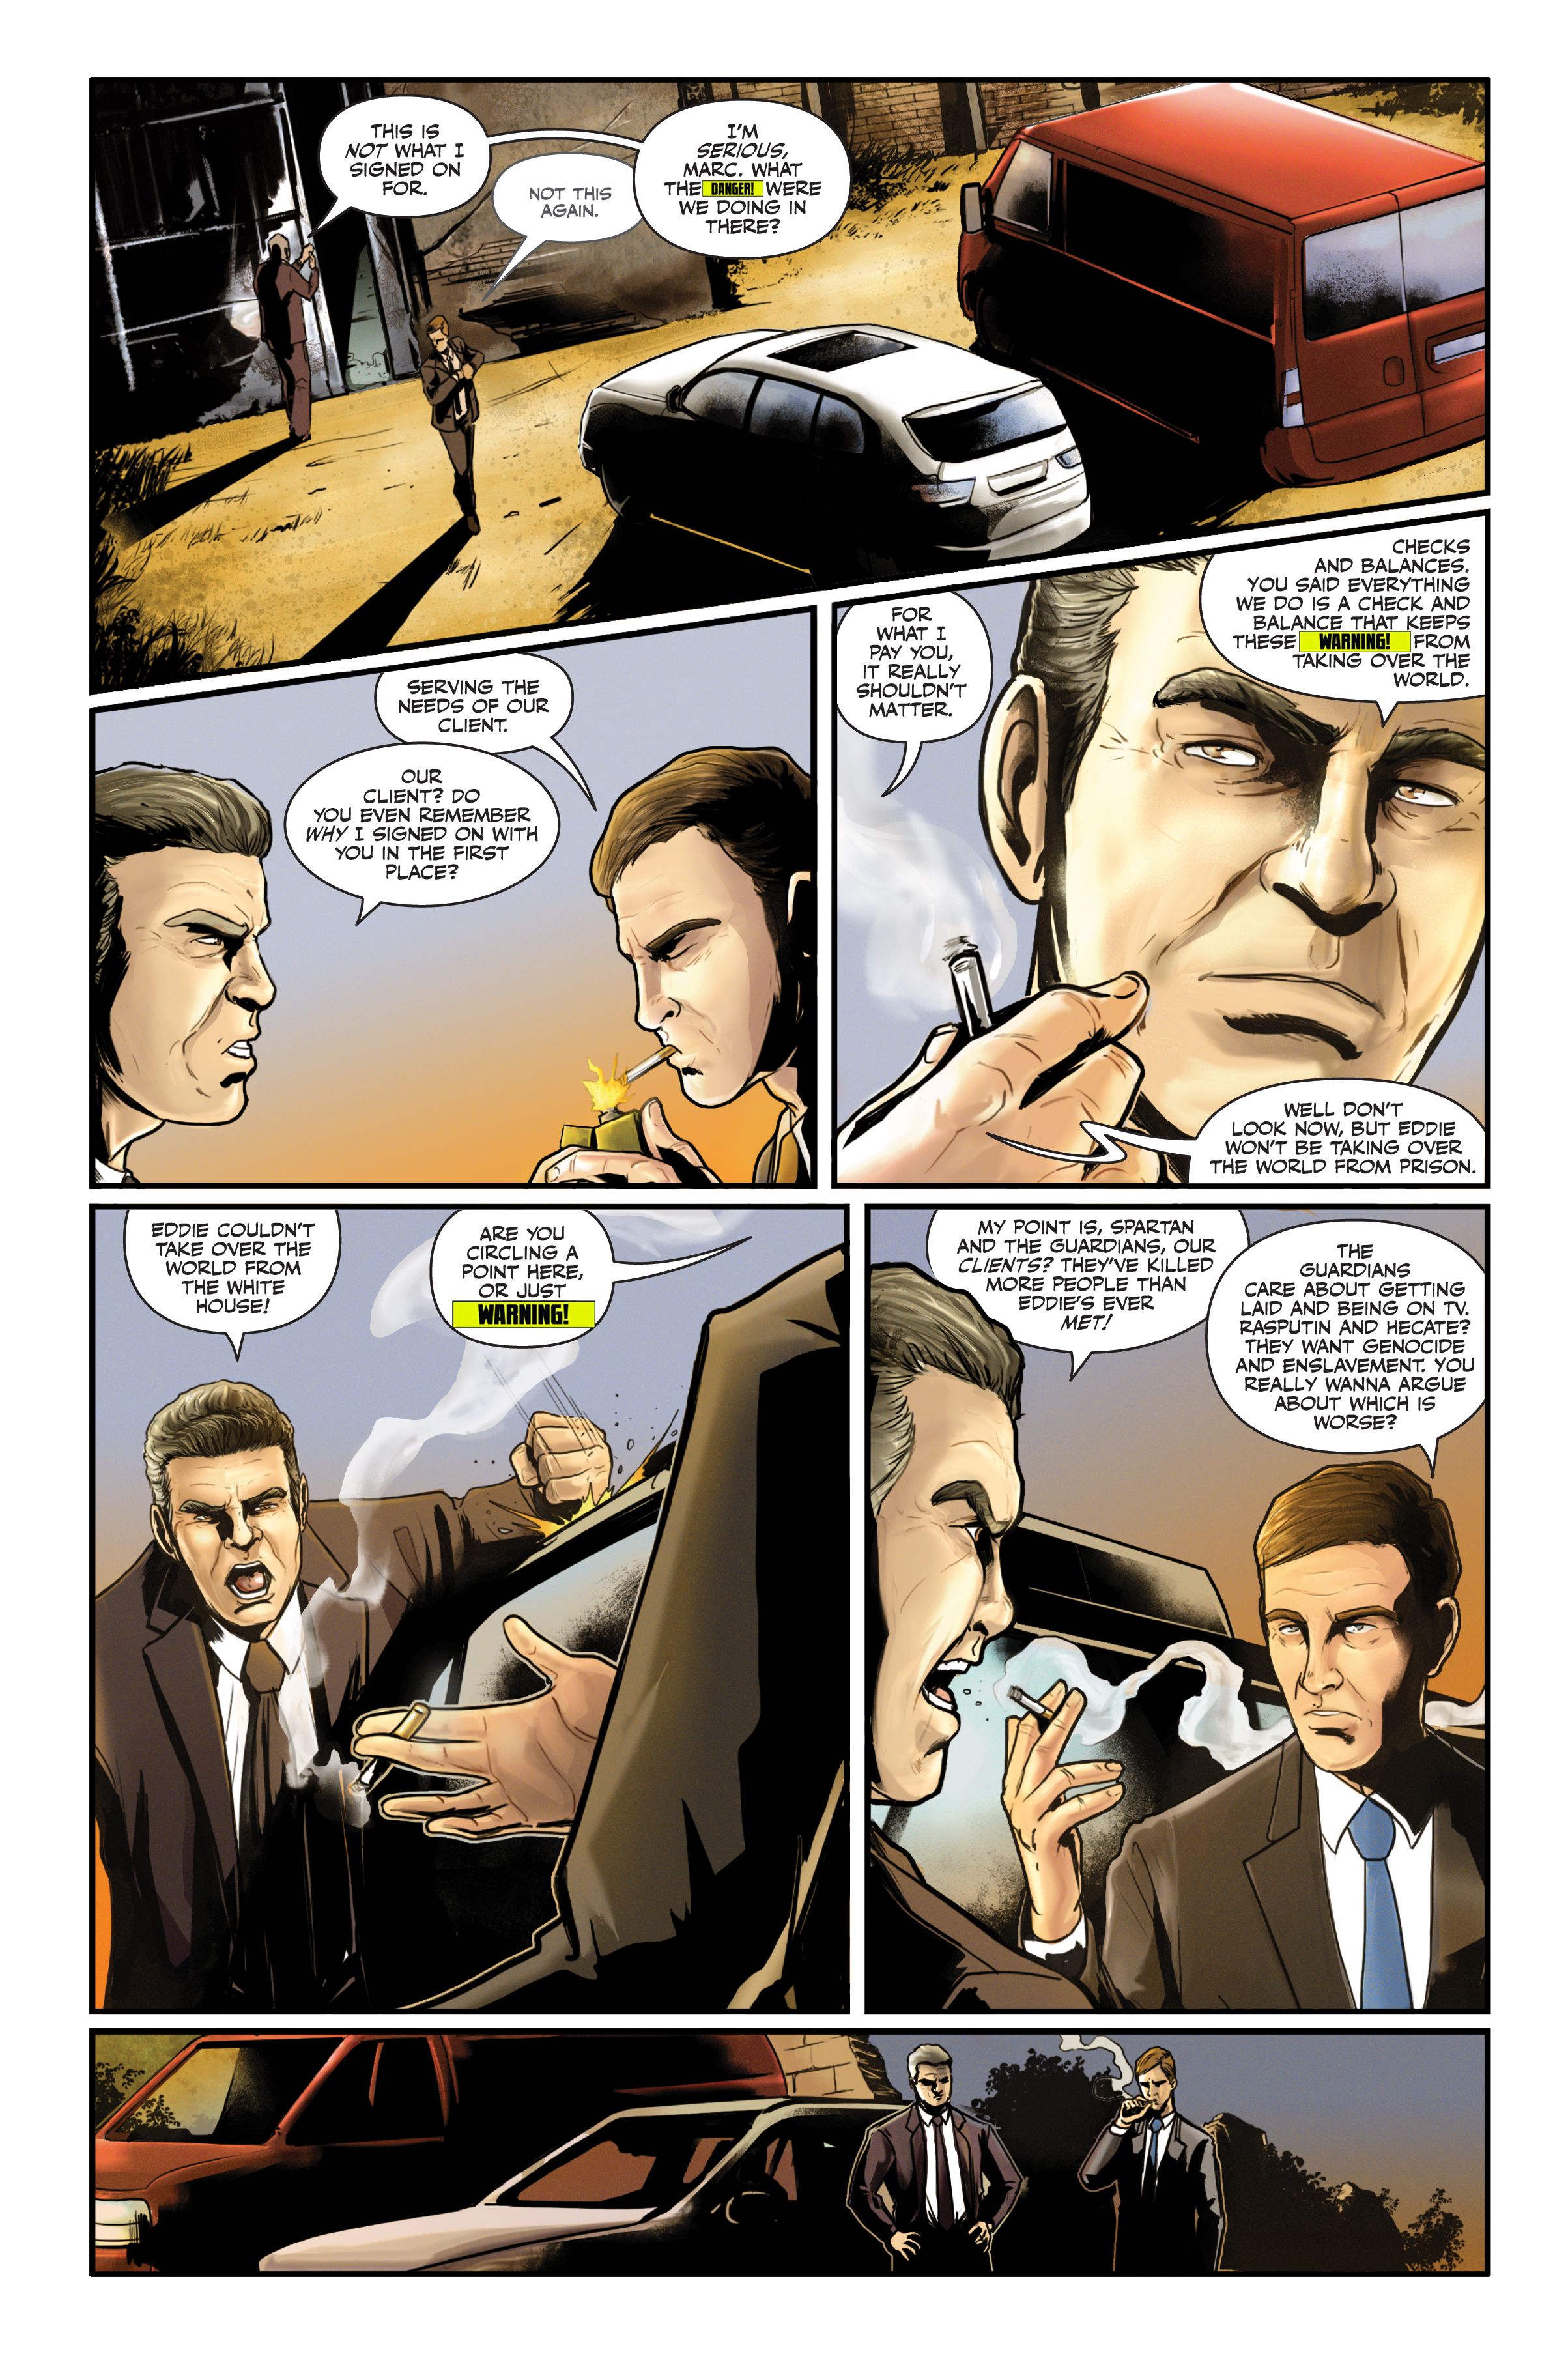 The Consultant #1 Page 4.jpg